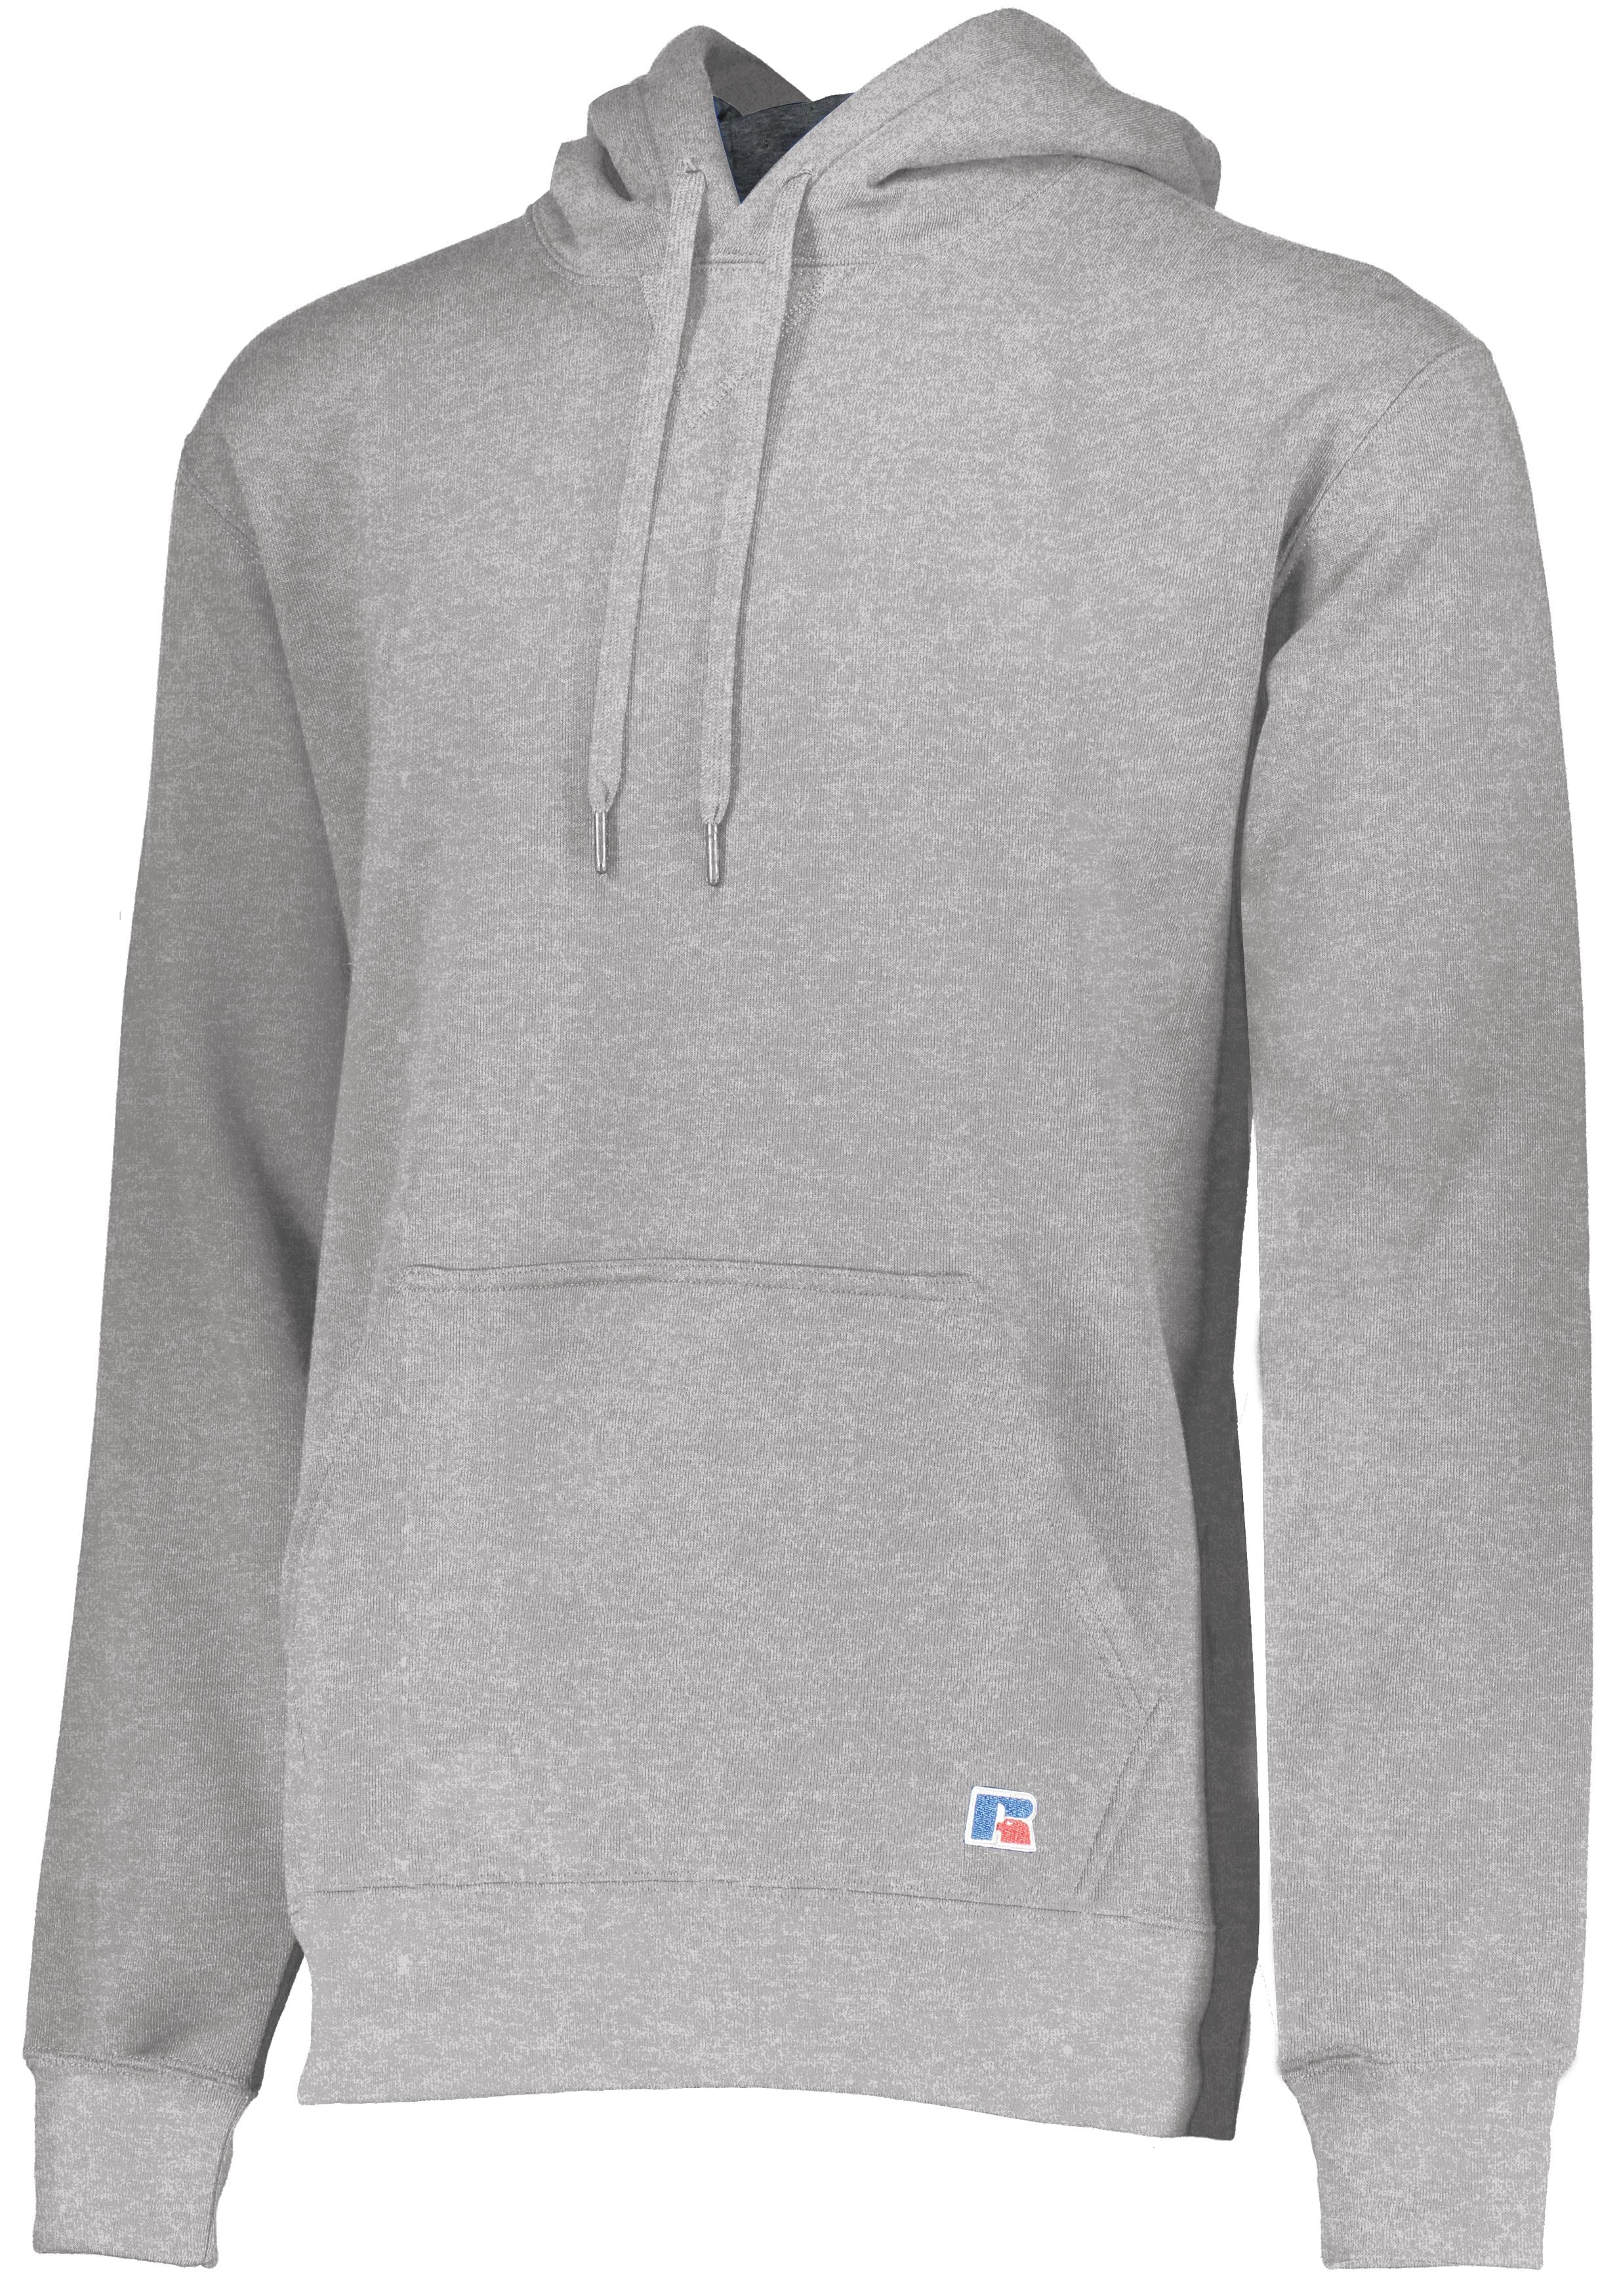 Russell Athletic 80/20 Fleece Hoodie in Medium Grey Heather  -Part of the Adult, Russell-Athletic-Products, Shirts product lines at KanaleyCreations.com